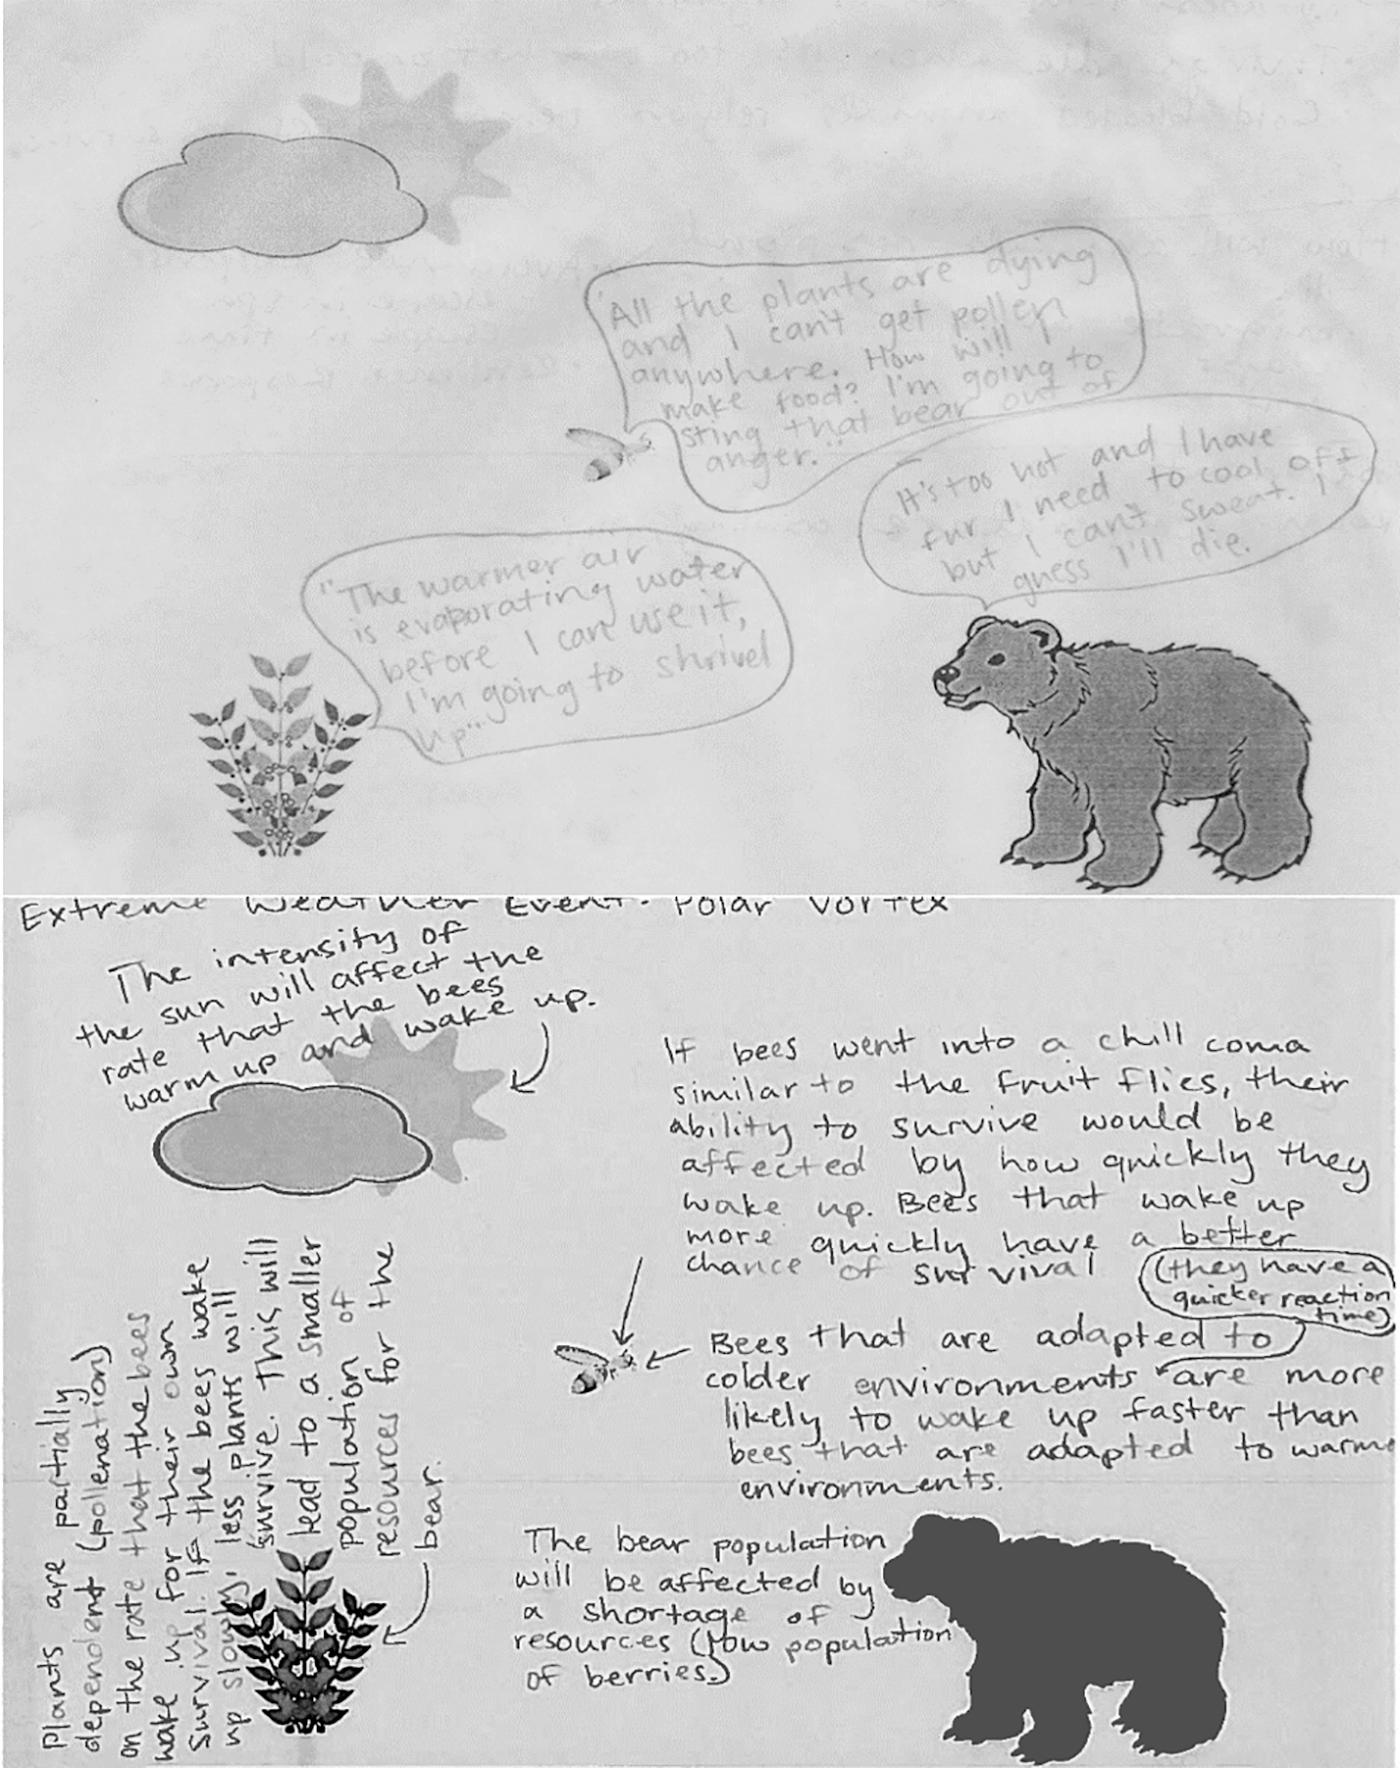 A student’s initial (top) and final (bottom) concept sketches. This student initially considered how a berry plant and bear would individually be affected by increased temperatures, but recognized that the bees might be affected by the death of plants (though not acknowledging any direct effects of climate change on bees). In the final sketch, the student recognized varying intensities of climate effects and the interactions among organisms within an ecosystem.